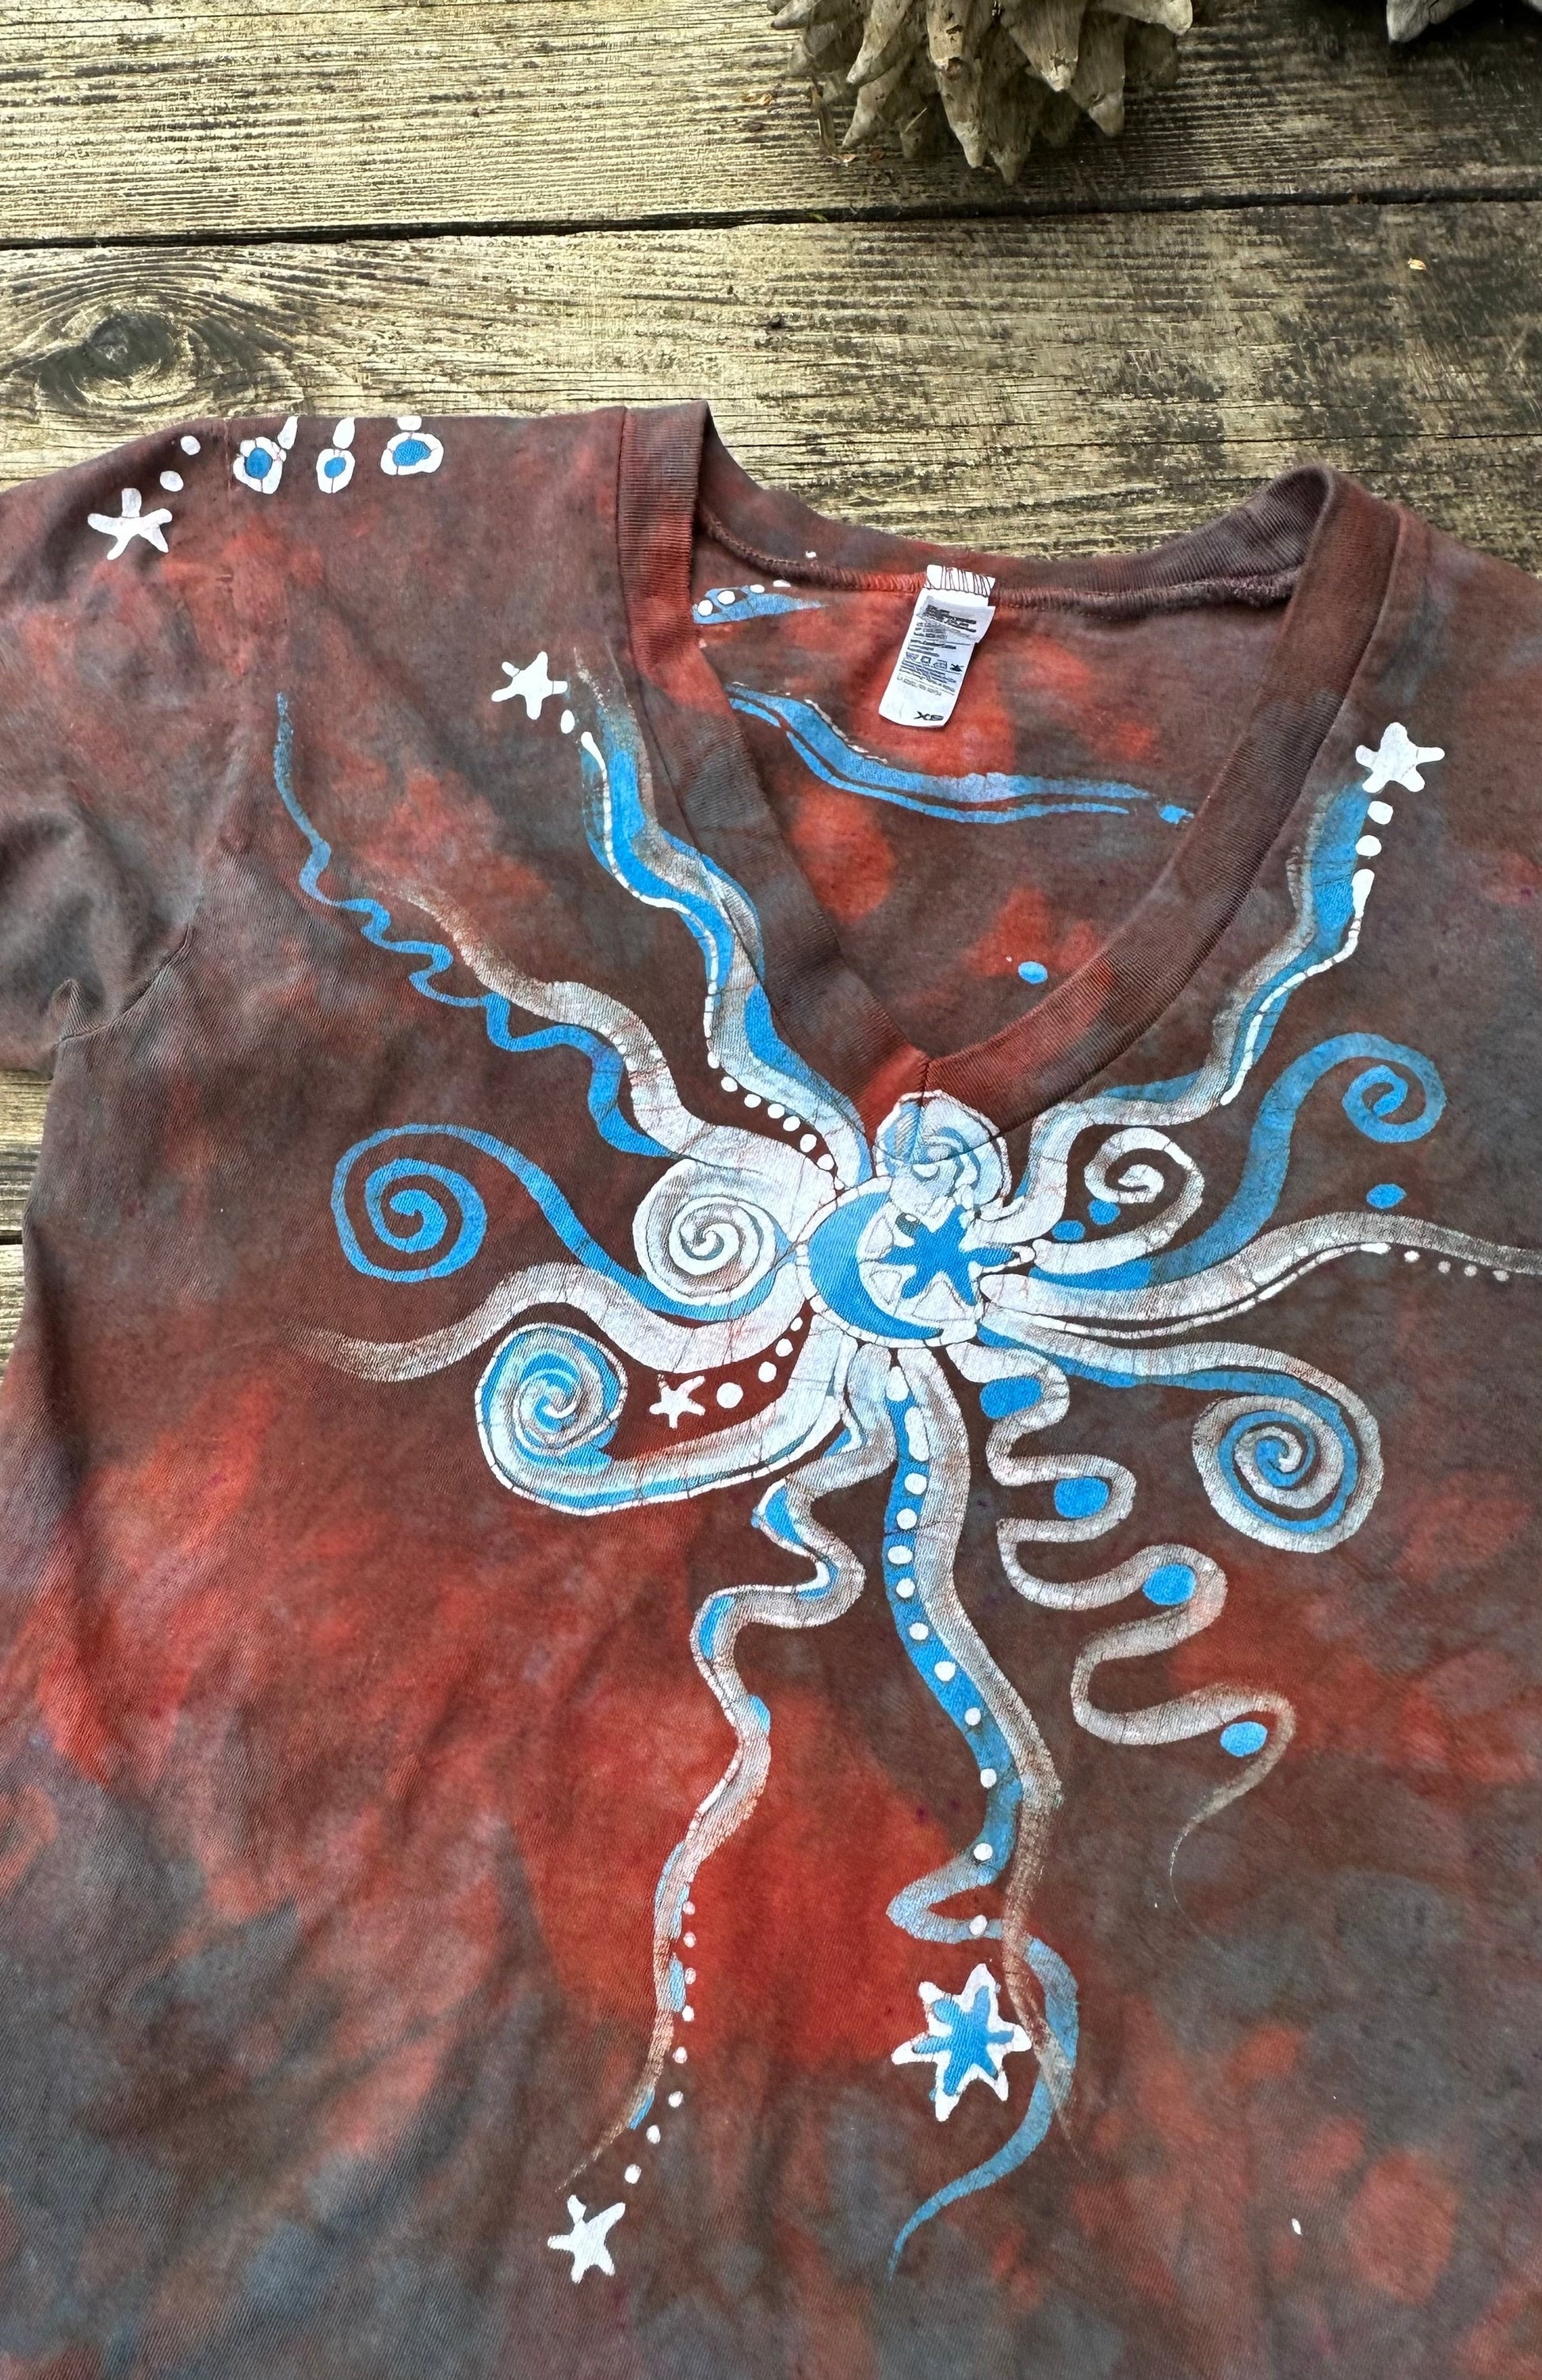 Starburst Moonbeams in Red Clay - Vneck Tee Size XS Unisex Tshirts Batikwalla by Victoria XS 